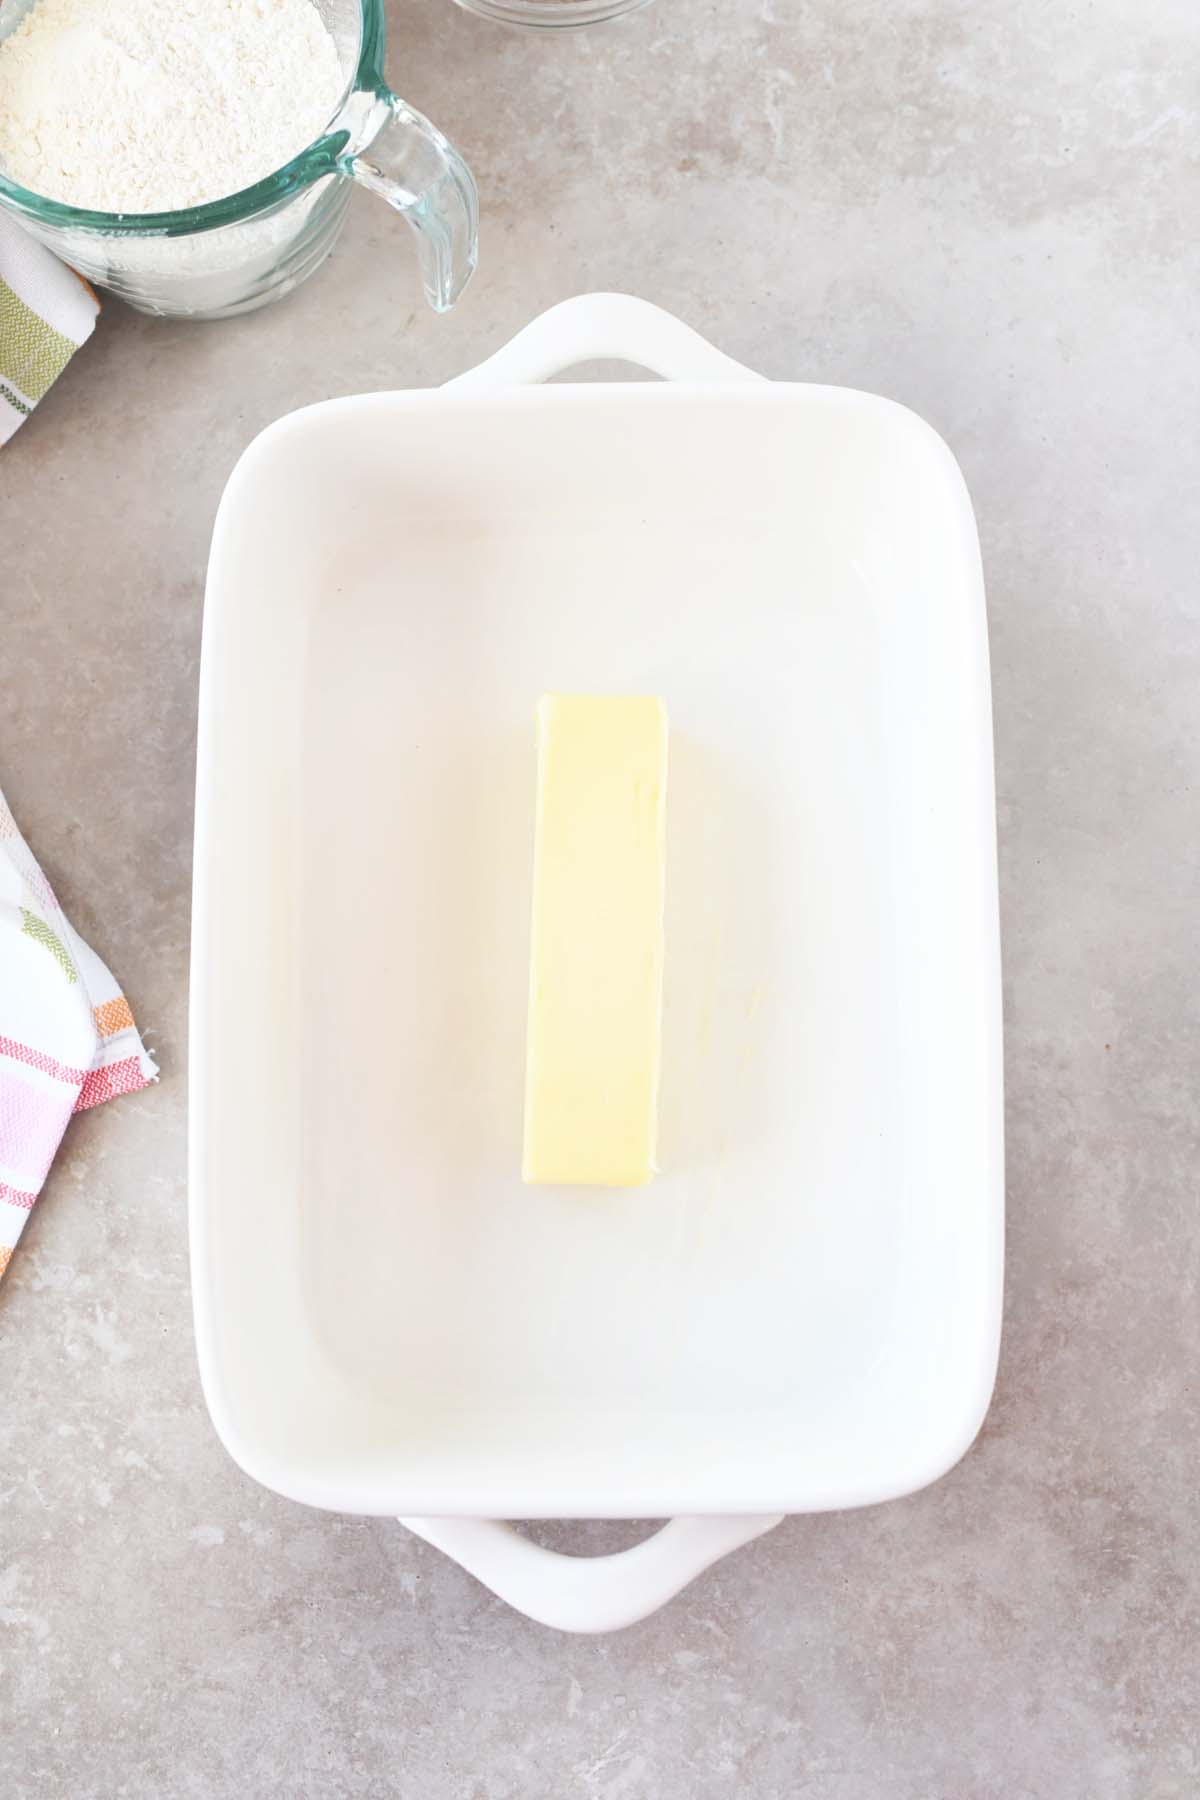 A stick of butter in a white baking dish.